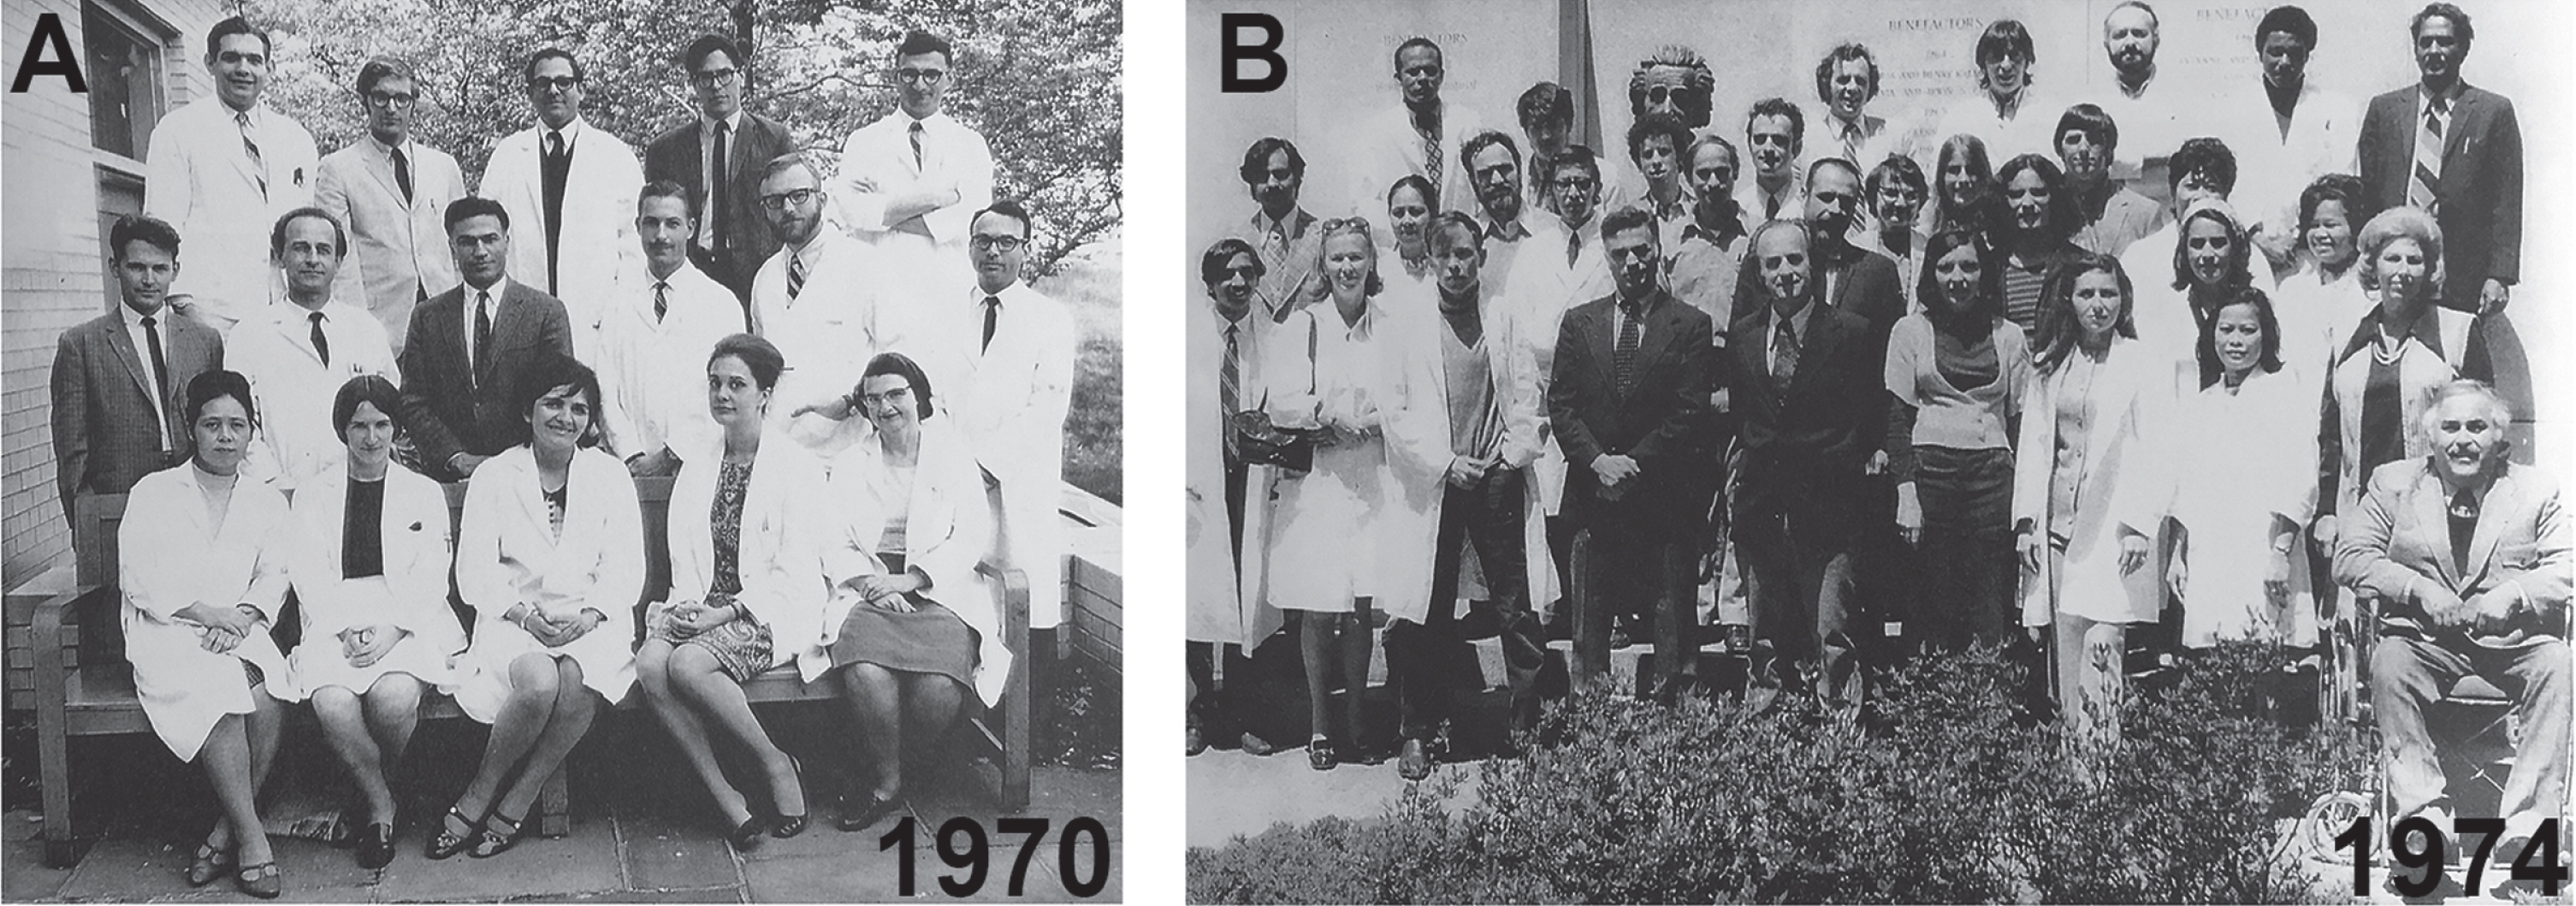 Robert Terry’s Neuropathology teams at the Einstein in the Bronx NY. A) In 1970, Bob Terry at the center with Henry Wisniewski to the left and Michael Shelansky in the back row. B) As the group has grown and prospered in 1974, with Bob Terry and Henry Wisniewski in the front row center and Khalid Iqbal in the far left.